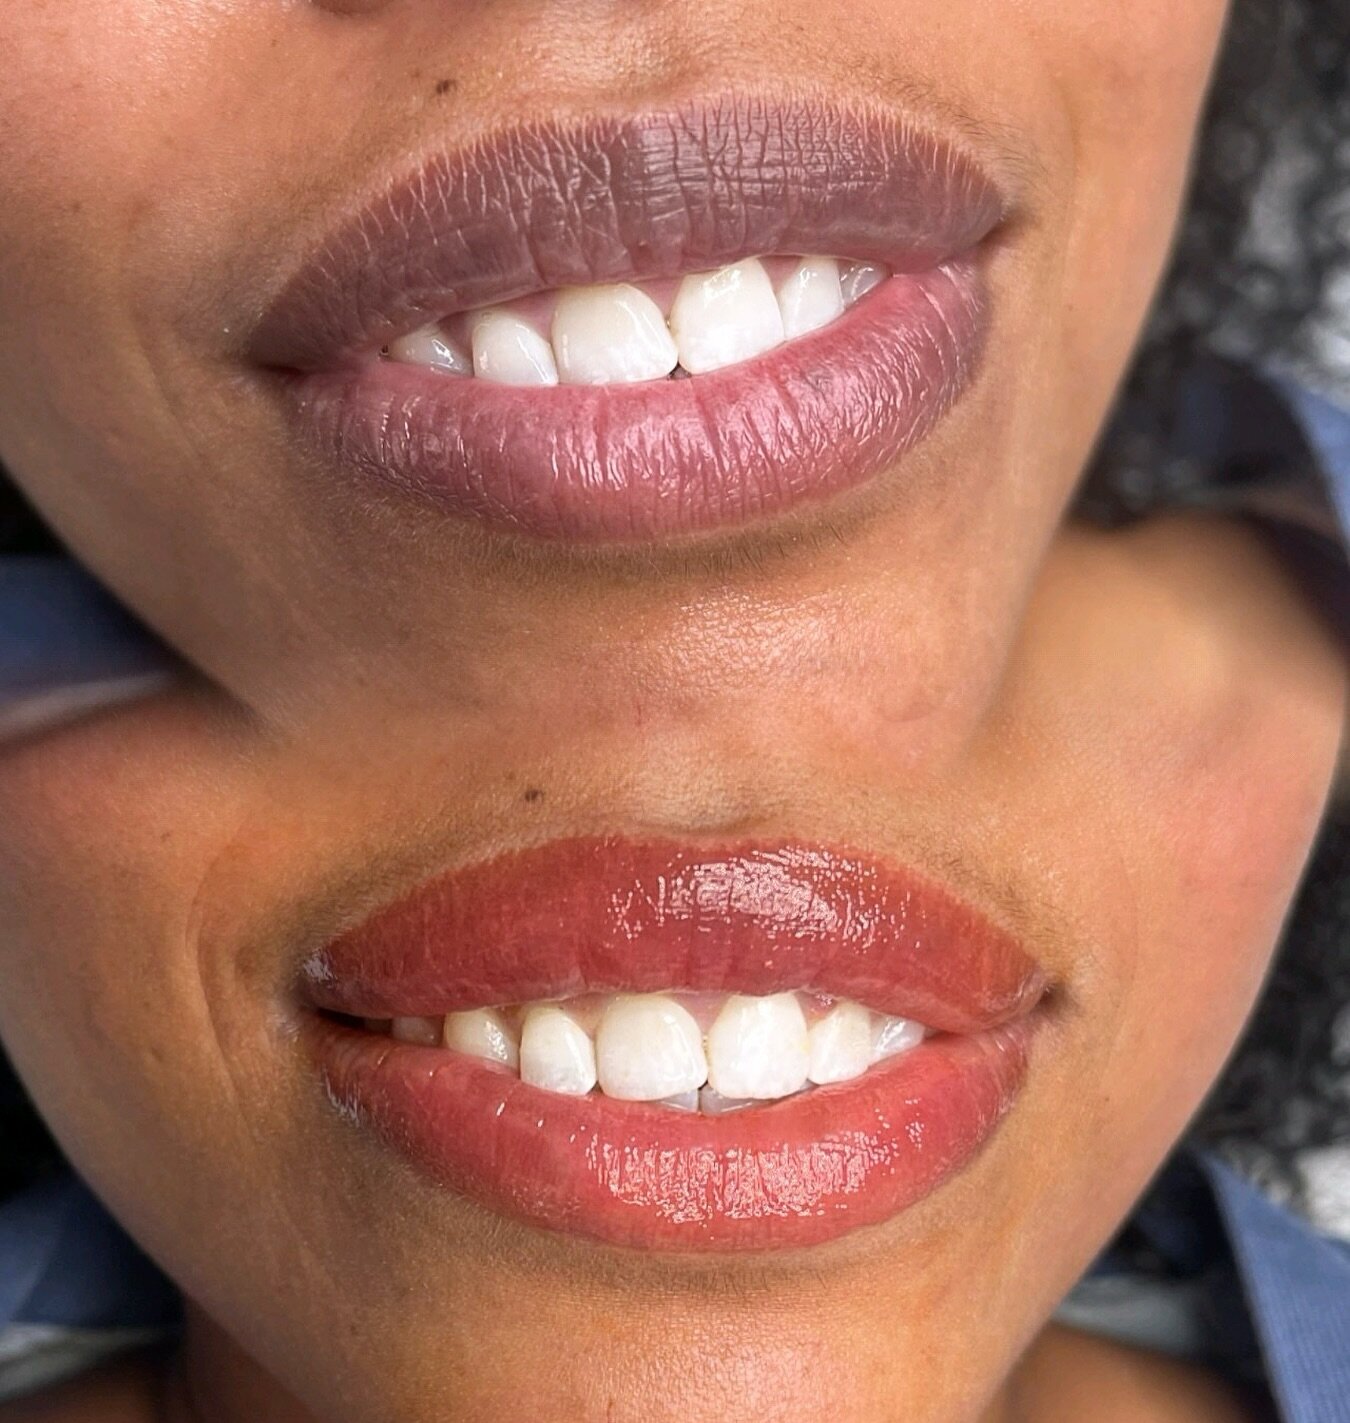 Neutralization session number one! These lips will need at least one more session before achieving our goal of a pretty nude pink color. Great progress today with @permablend_pigments 💄 

To schedule your lip blush appt, head to microbladingbynicole